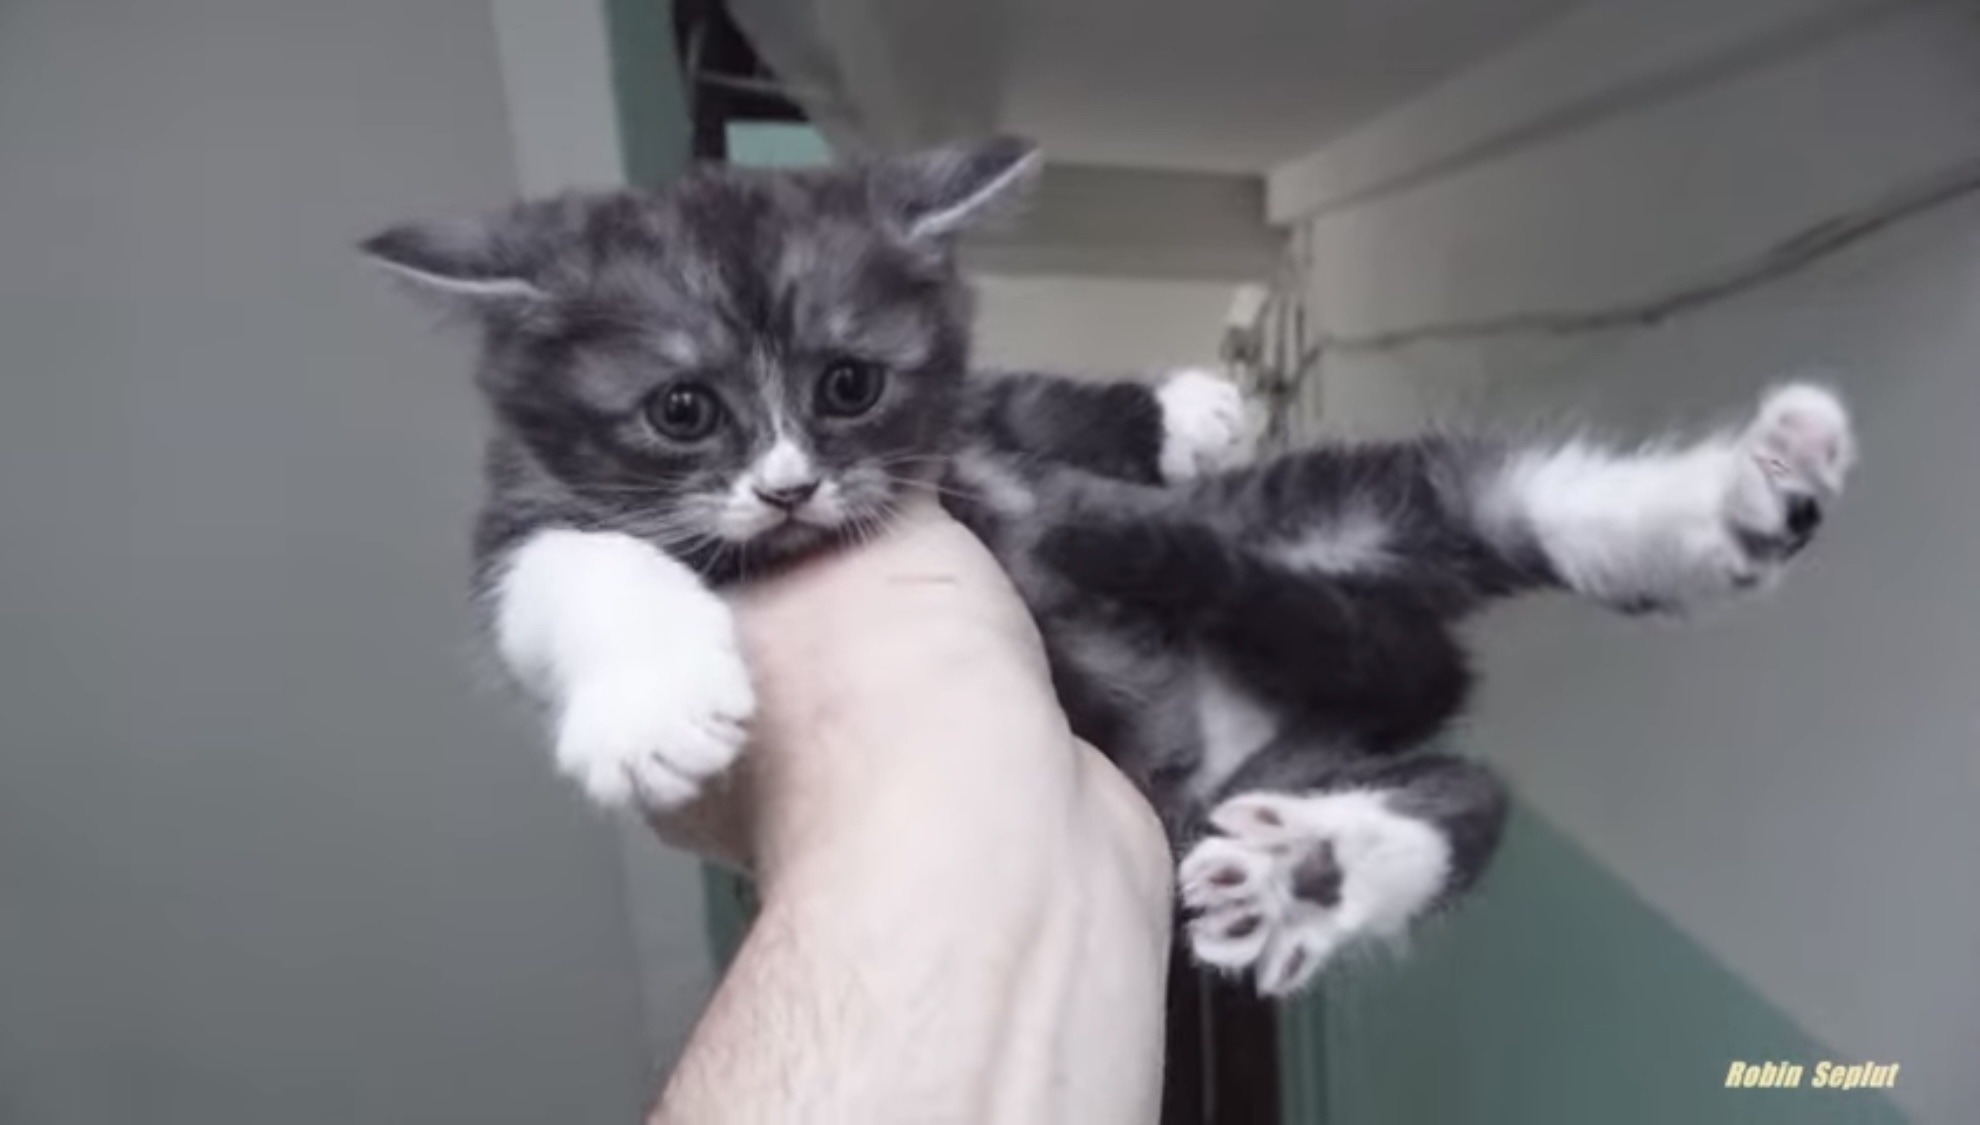 a disgruntled kitten being held in the palm of a man's hand